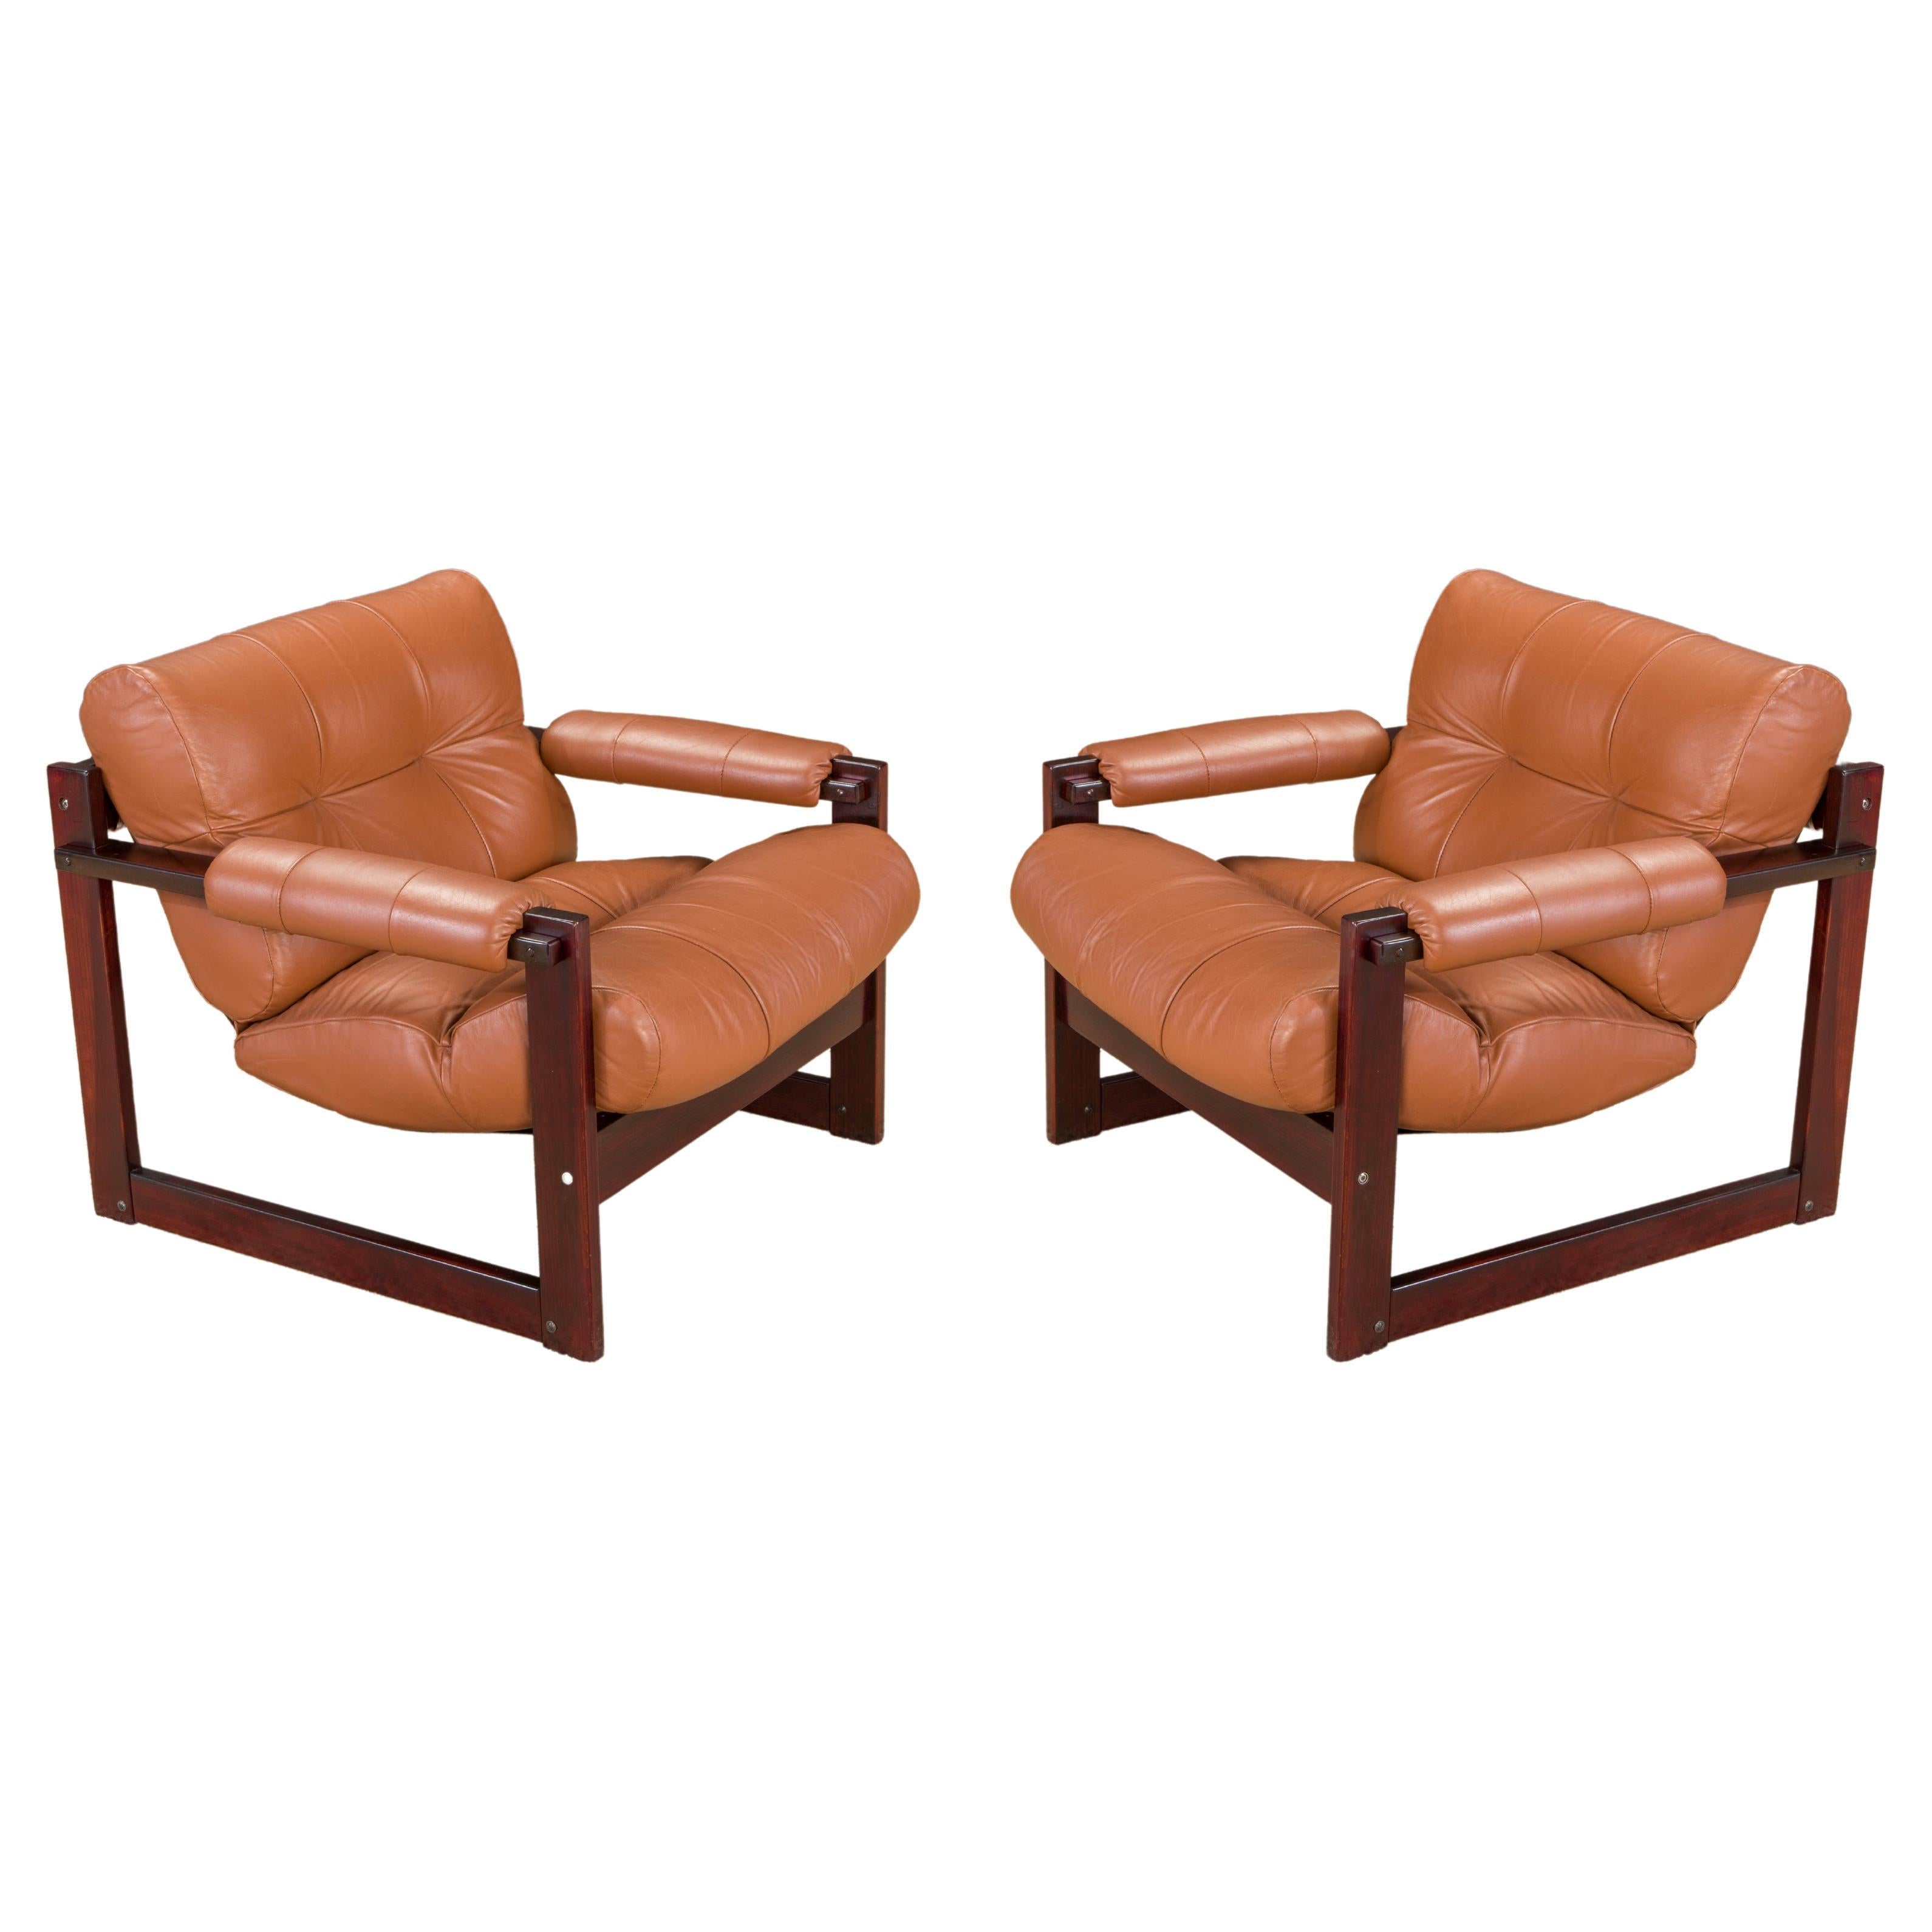 Percival Lafer 'S-1' Rosewood and Leather Lounge Chairs, Brazil, 1976, Signed For Sale